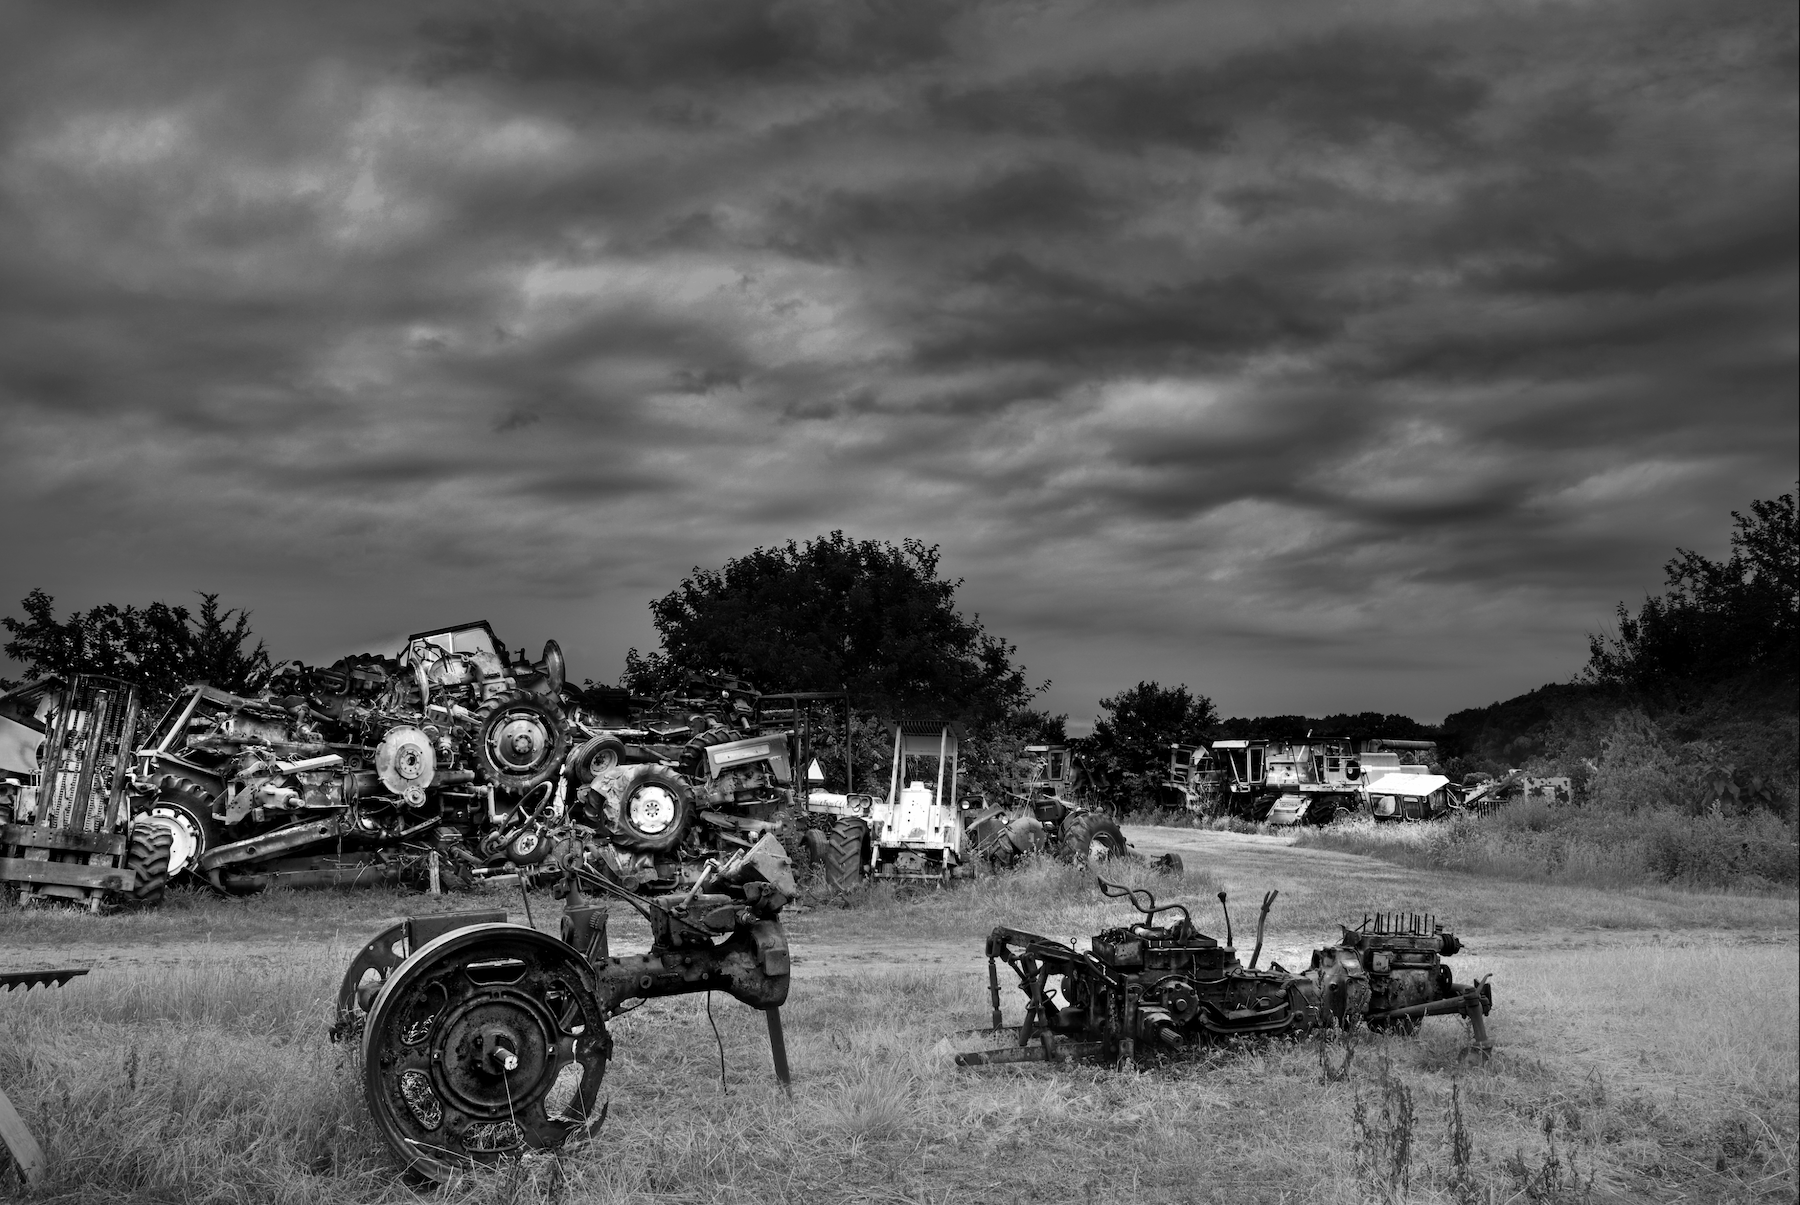 a big pile of broken tractors and engines with a angry sky in the background